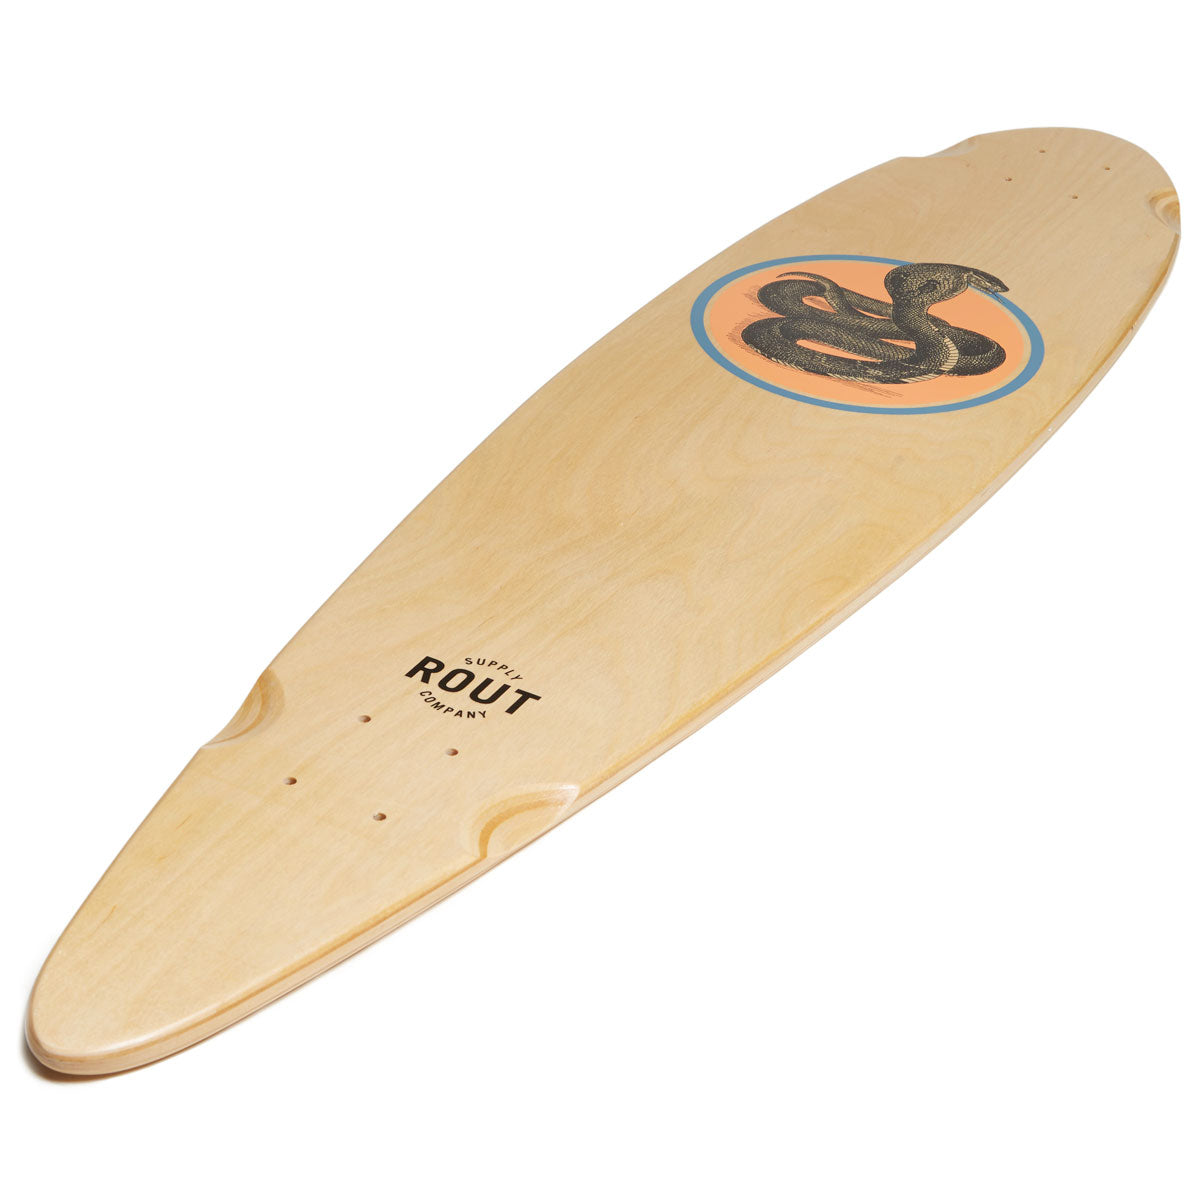 Rout Threat Pintail Longboard Complete image 4